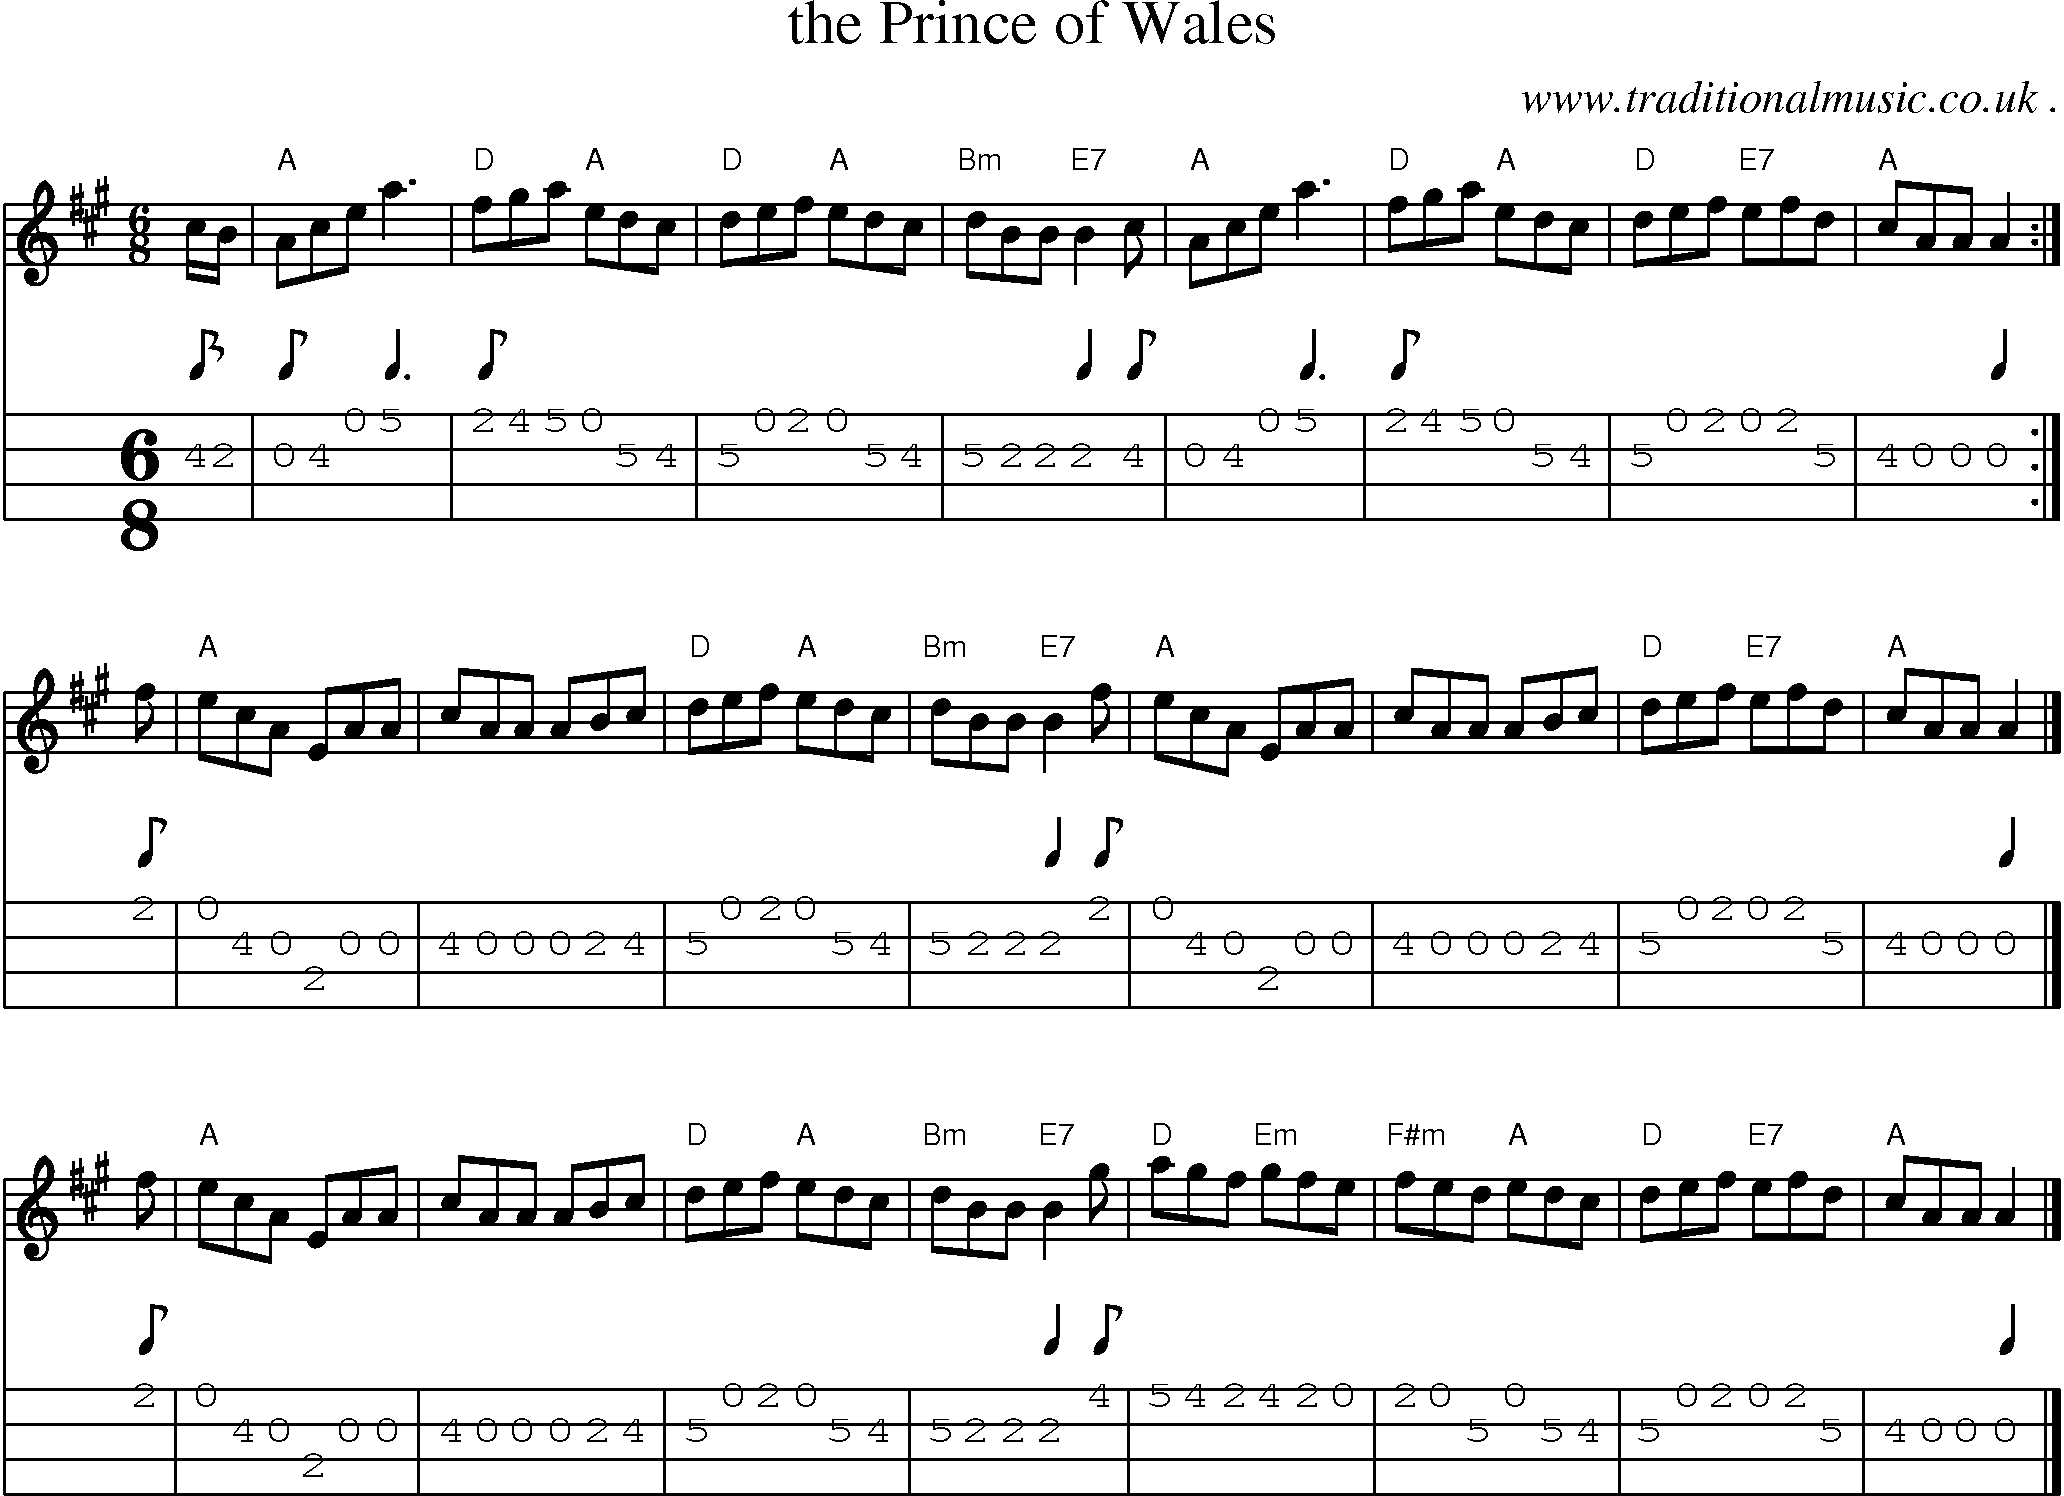 Sheet-music  score, Chords and Mandolin Tabs for The Prince Of Wales